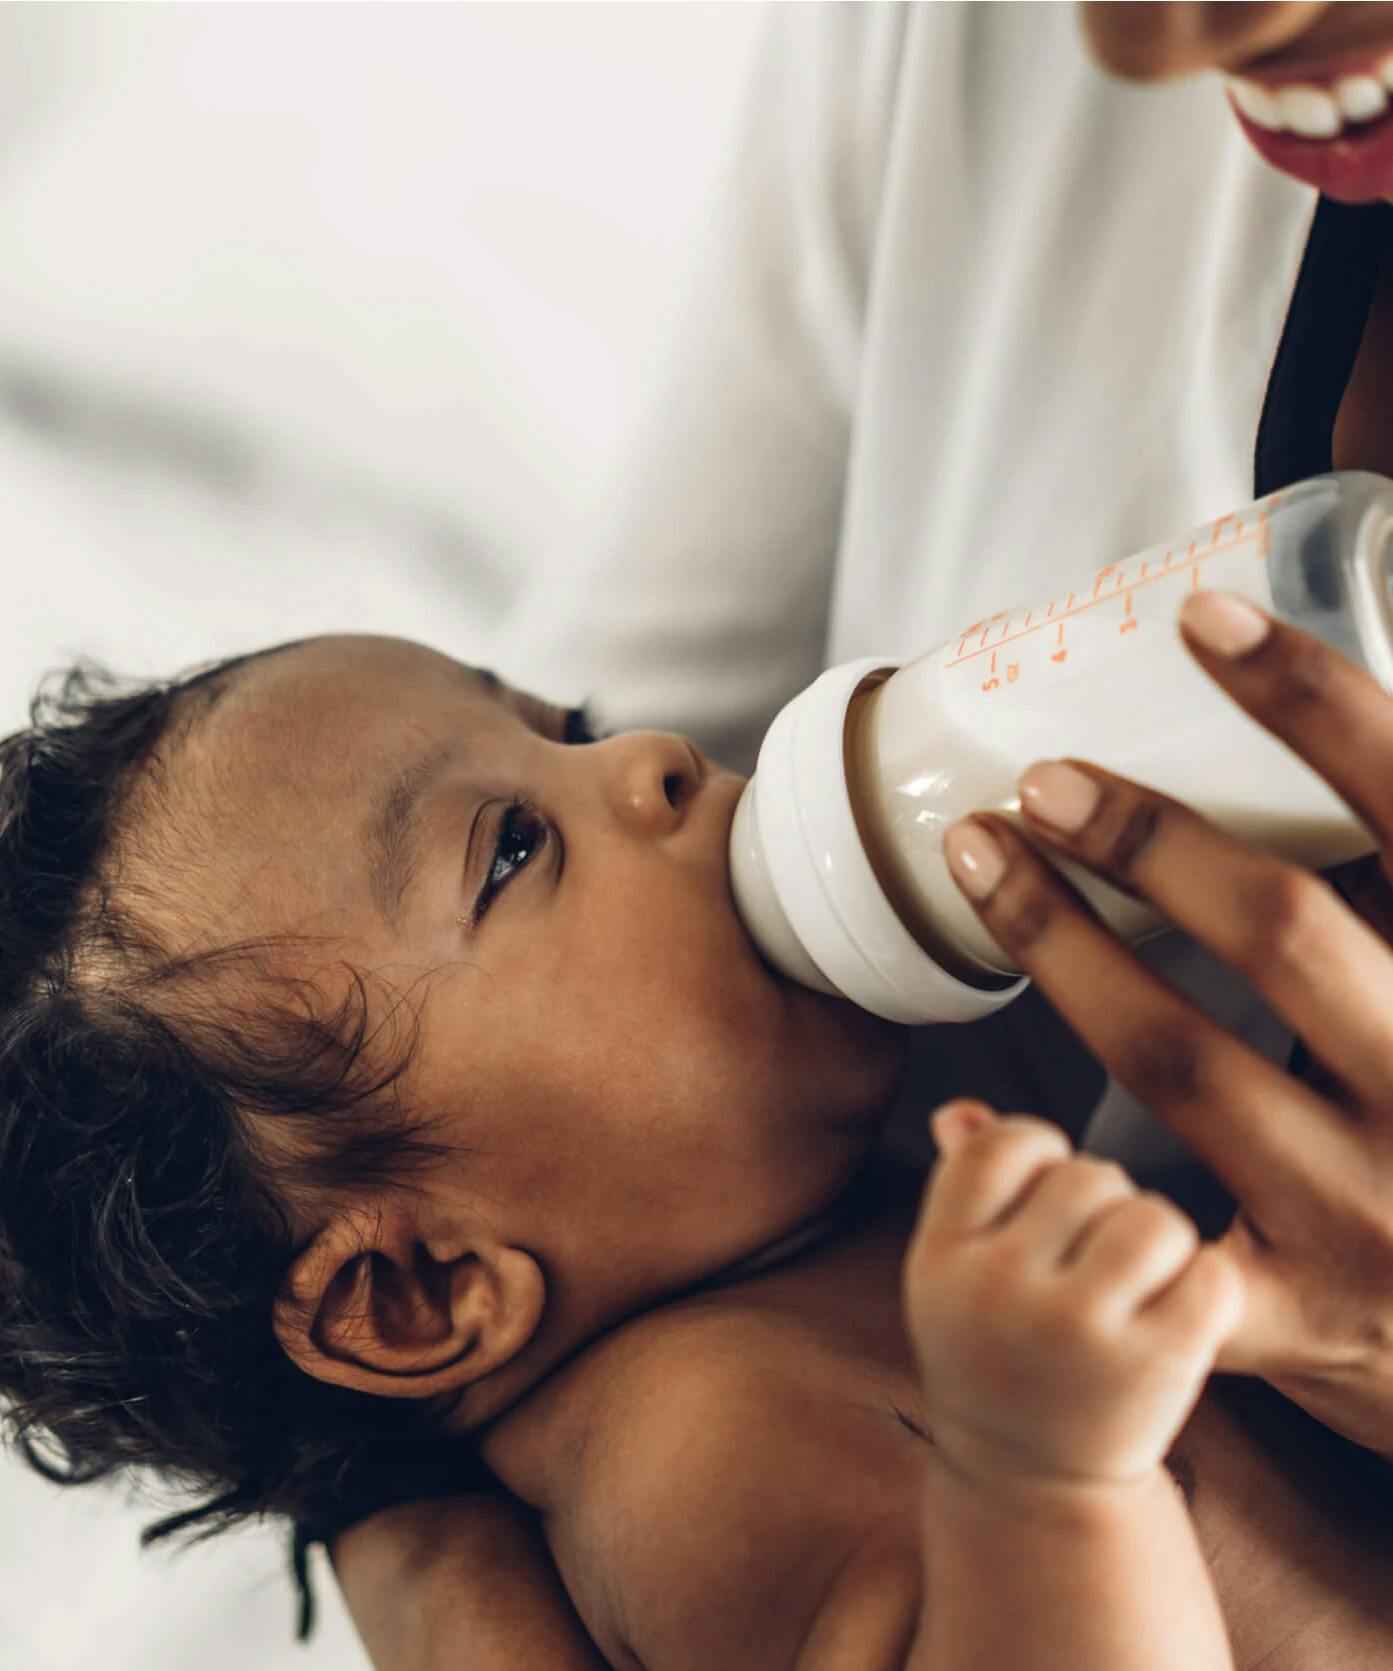 shutterstock Donating Breast Milk Is A Priceless Gift